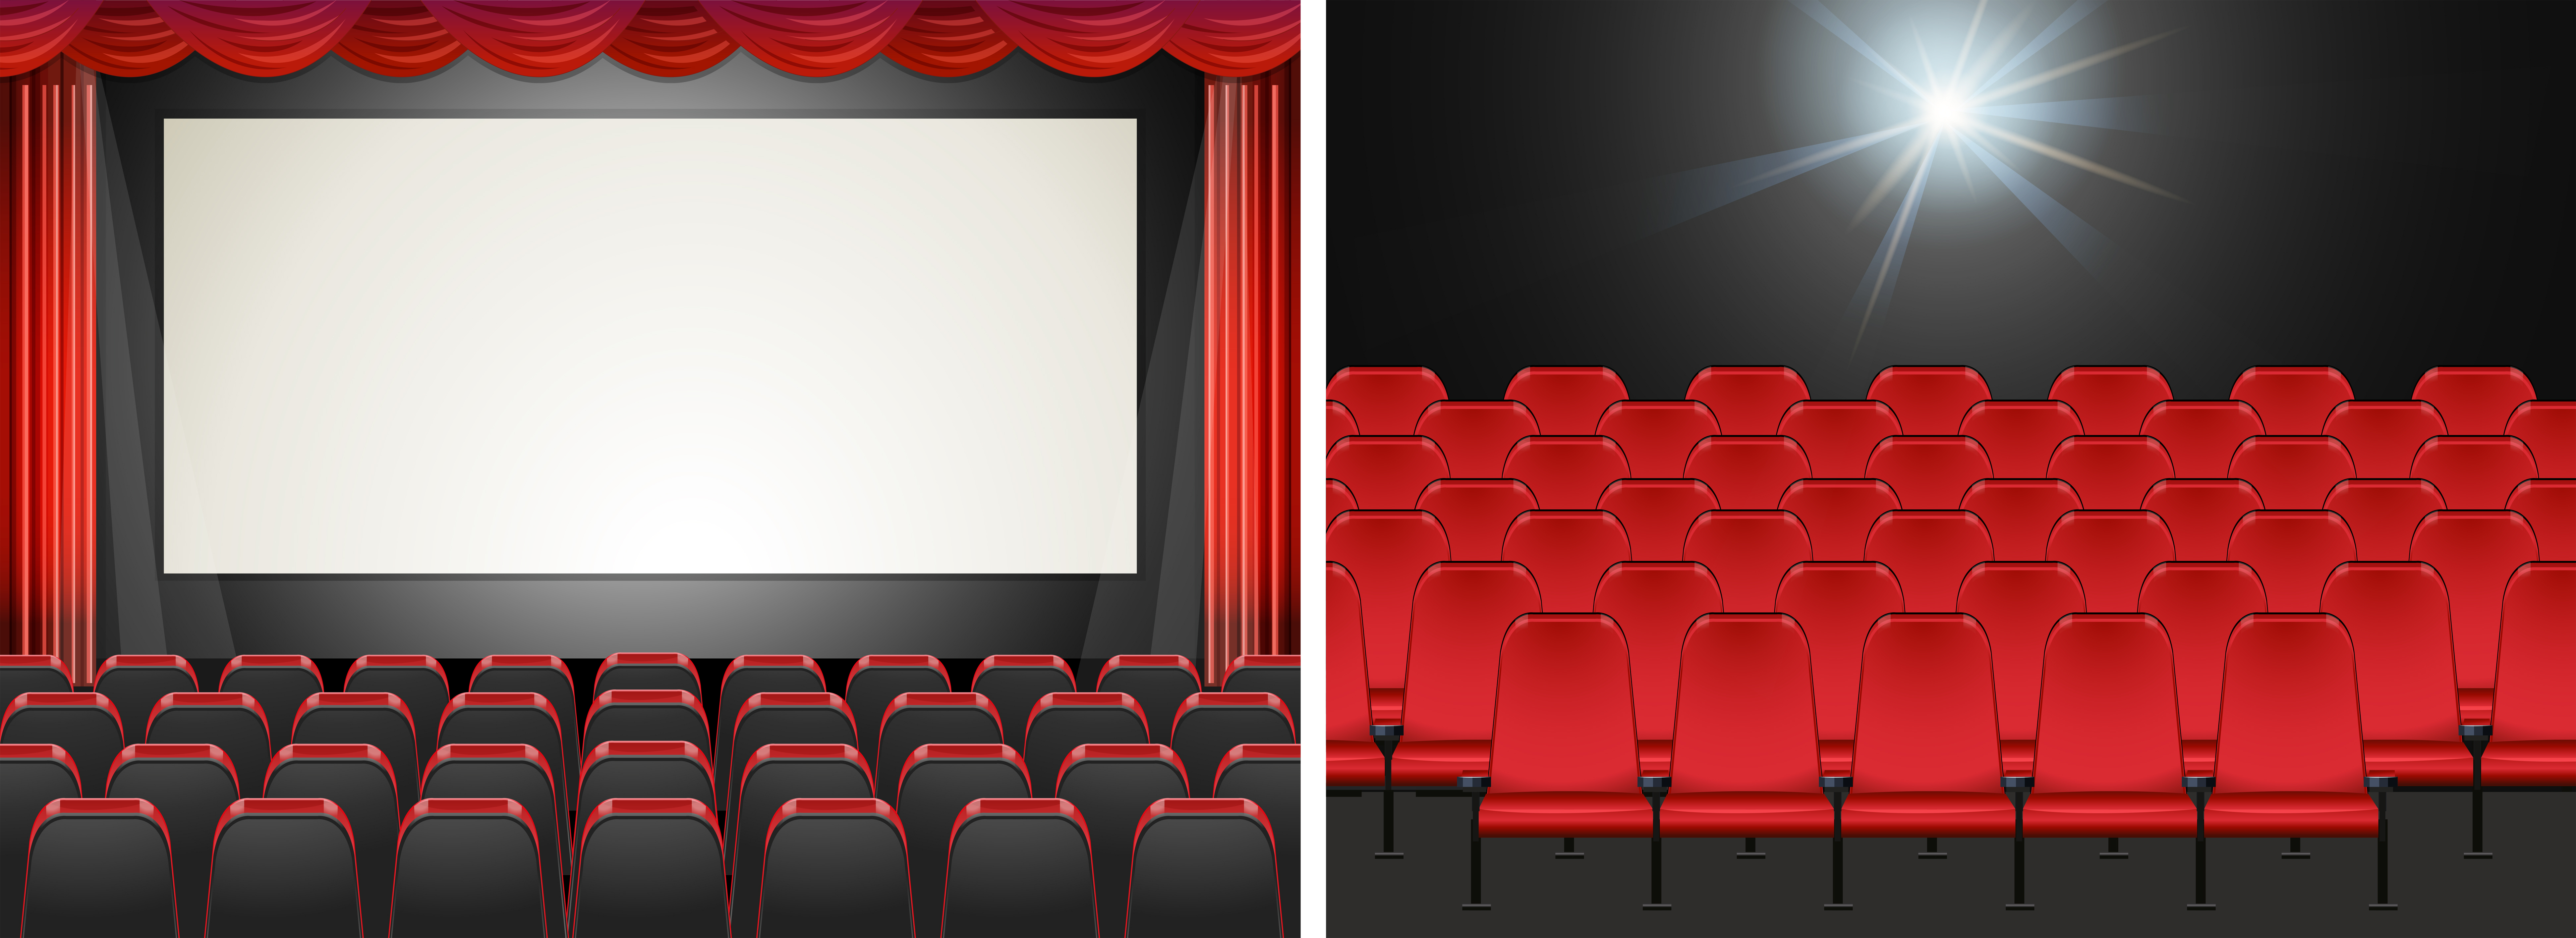 Movie screen in the cinema Download Free Vectors, Clipart Graphics